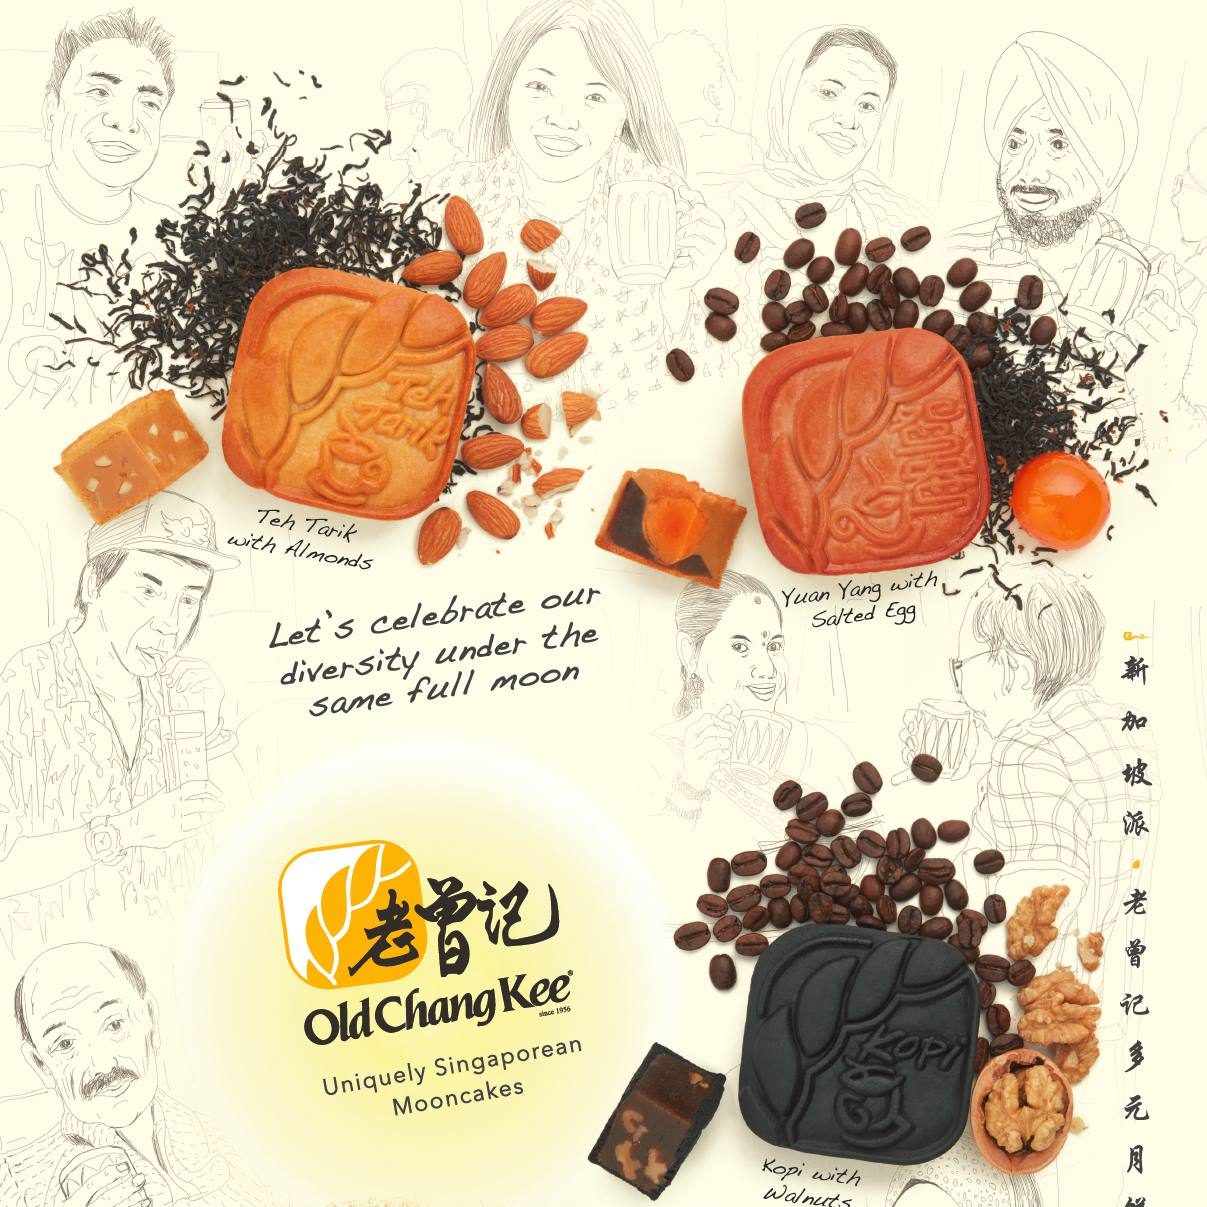 Old Chang Kee Singapore Mid-Autumn Festival Mooncakes Promotion 1 to 15 Sep 2016